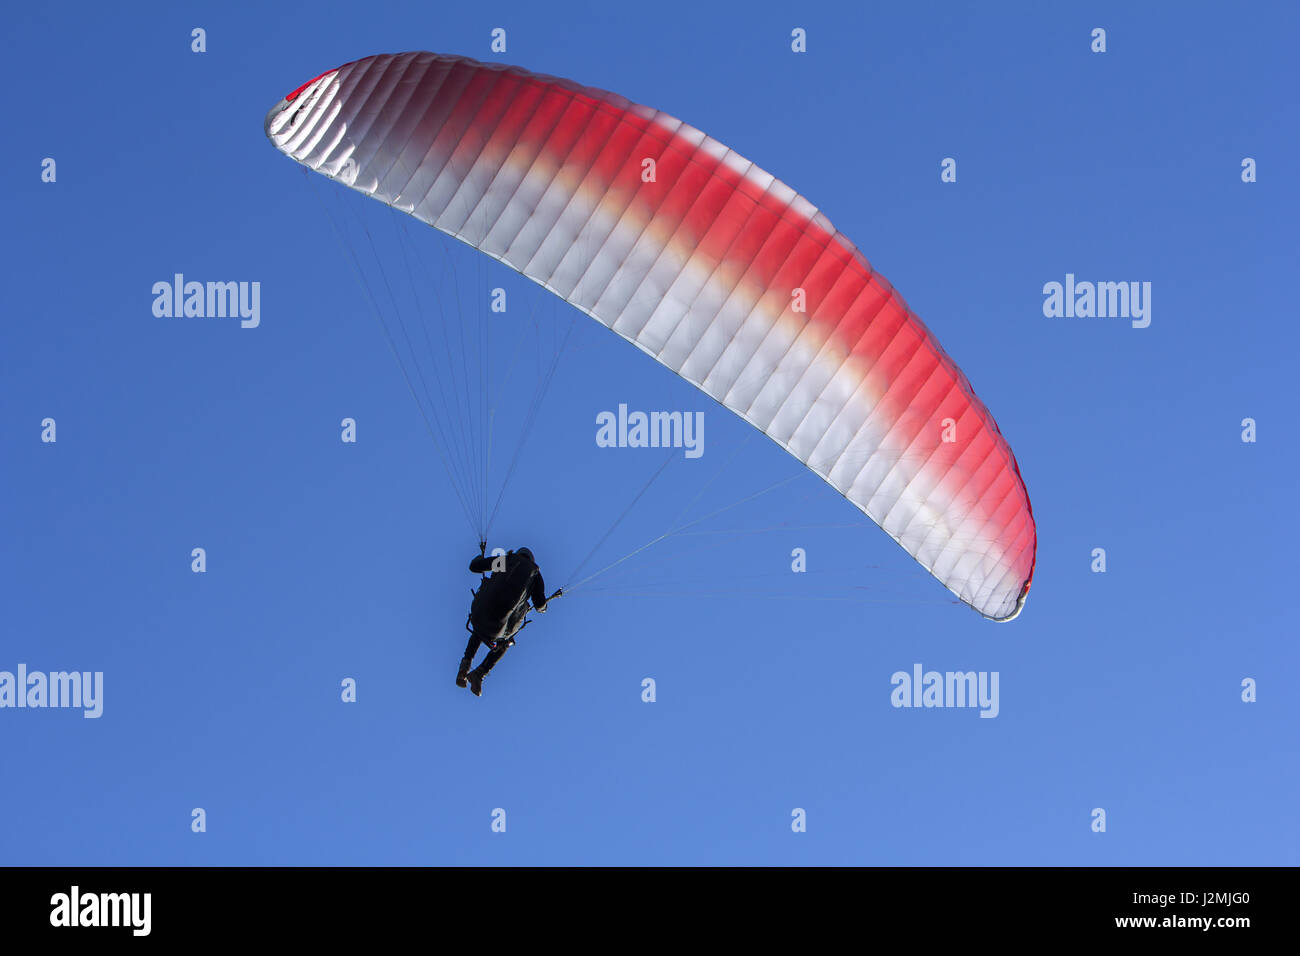 Paraglider flying in the blue sky as background Stock Photo